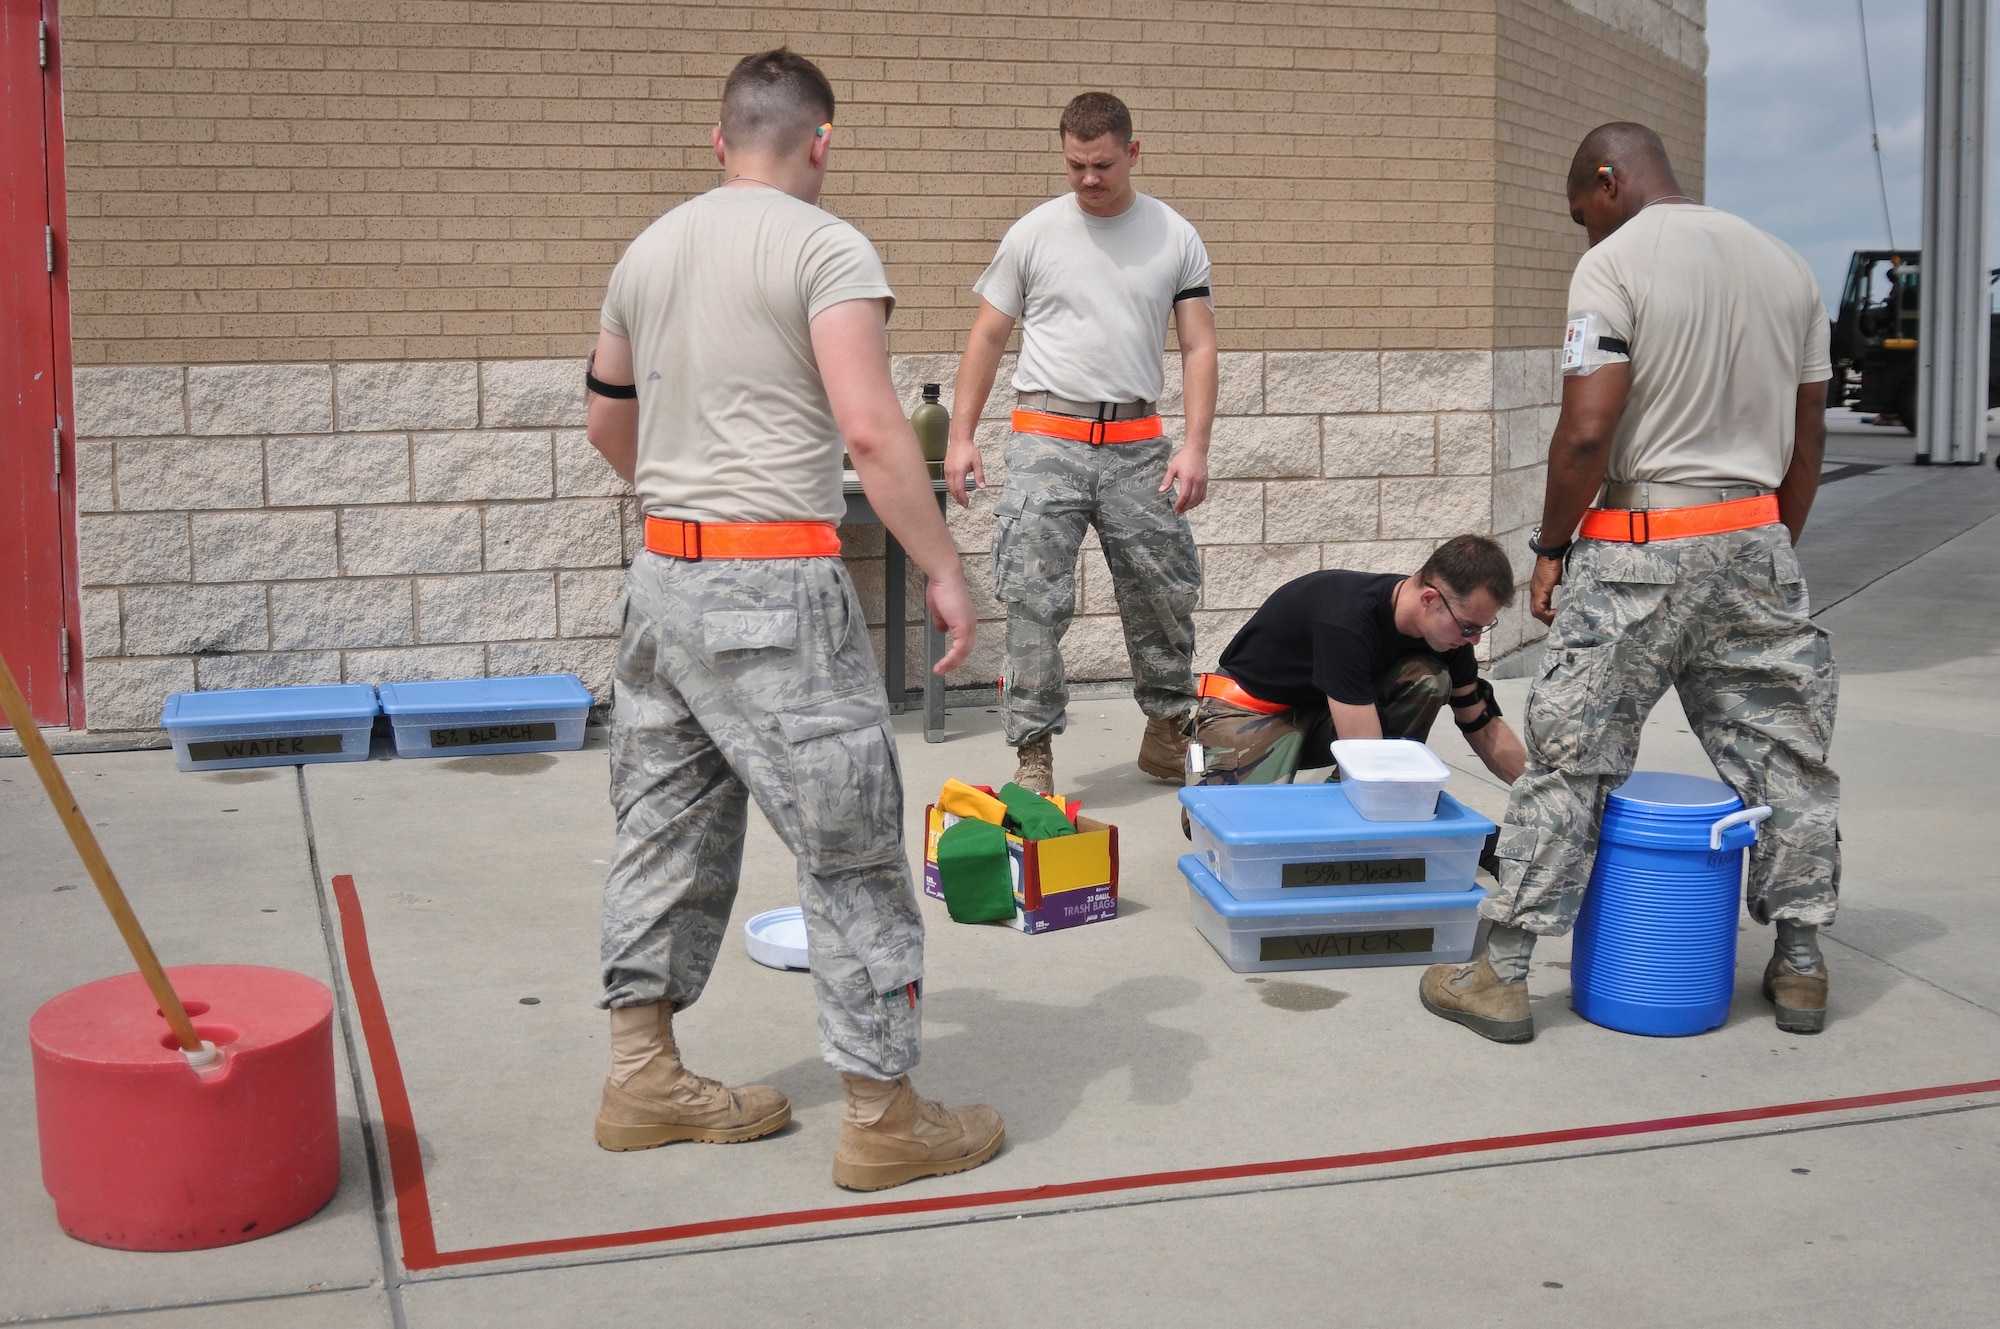 Airmen from the 317th Airlift Group at Dyess Air Force Base, Texas, set up a chemical decontamination station May 19, 2010, at the Gulfport Combat Readiness Training Center in Gulfport, Miss. The Airmen were participating in an Air Mobility Command Operational Readiness Inspection that also included more than 300 troops from the Kentucky Air Guard's 123rd Airlift Wing. The 123rd served as the lead unit for the inspection. (U.S. Air Force photo/Tech. Sgt. Dennis Flora) (Released)